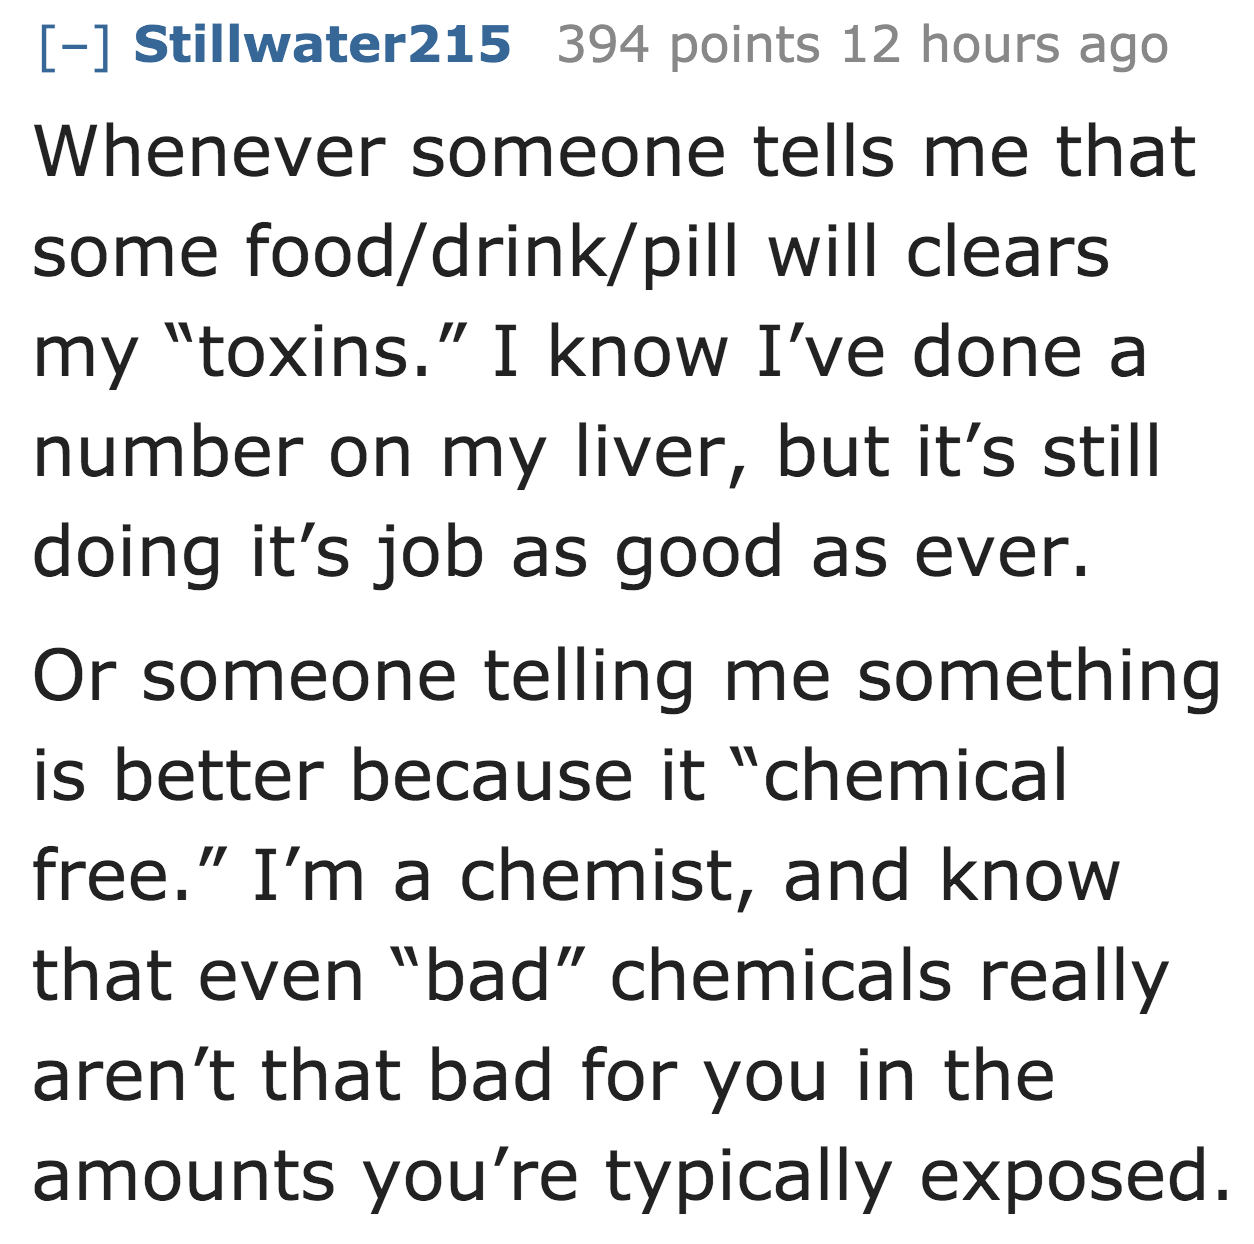 angle - Stillwater215 394 points 12 hours ago Whenever someone tells me that some fooddrinkpill will clears my "toxins." I know I've done a number on my liver, but it's still doing it's job as good as ever. Or someone telling me something is better becaus